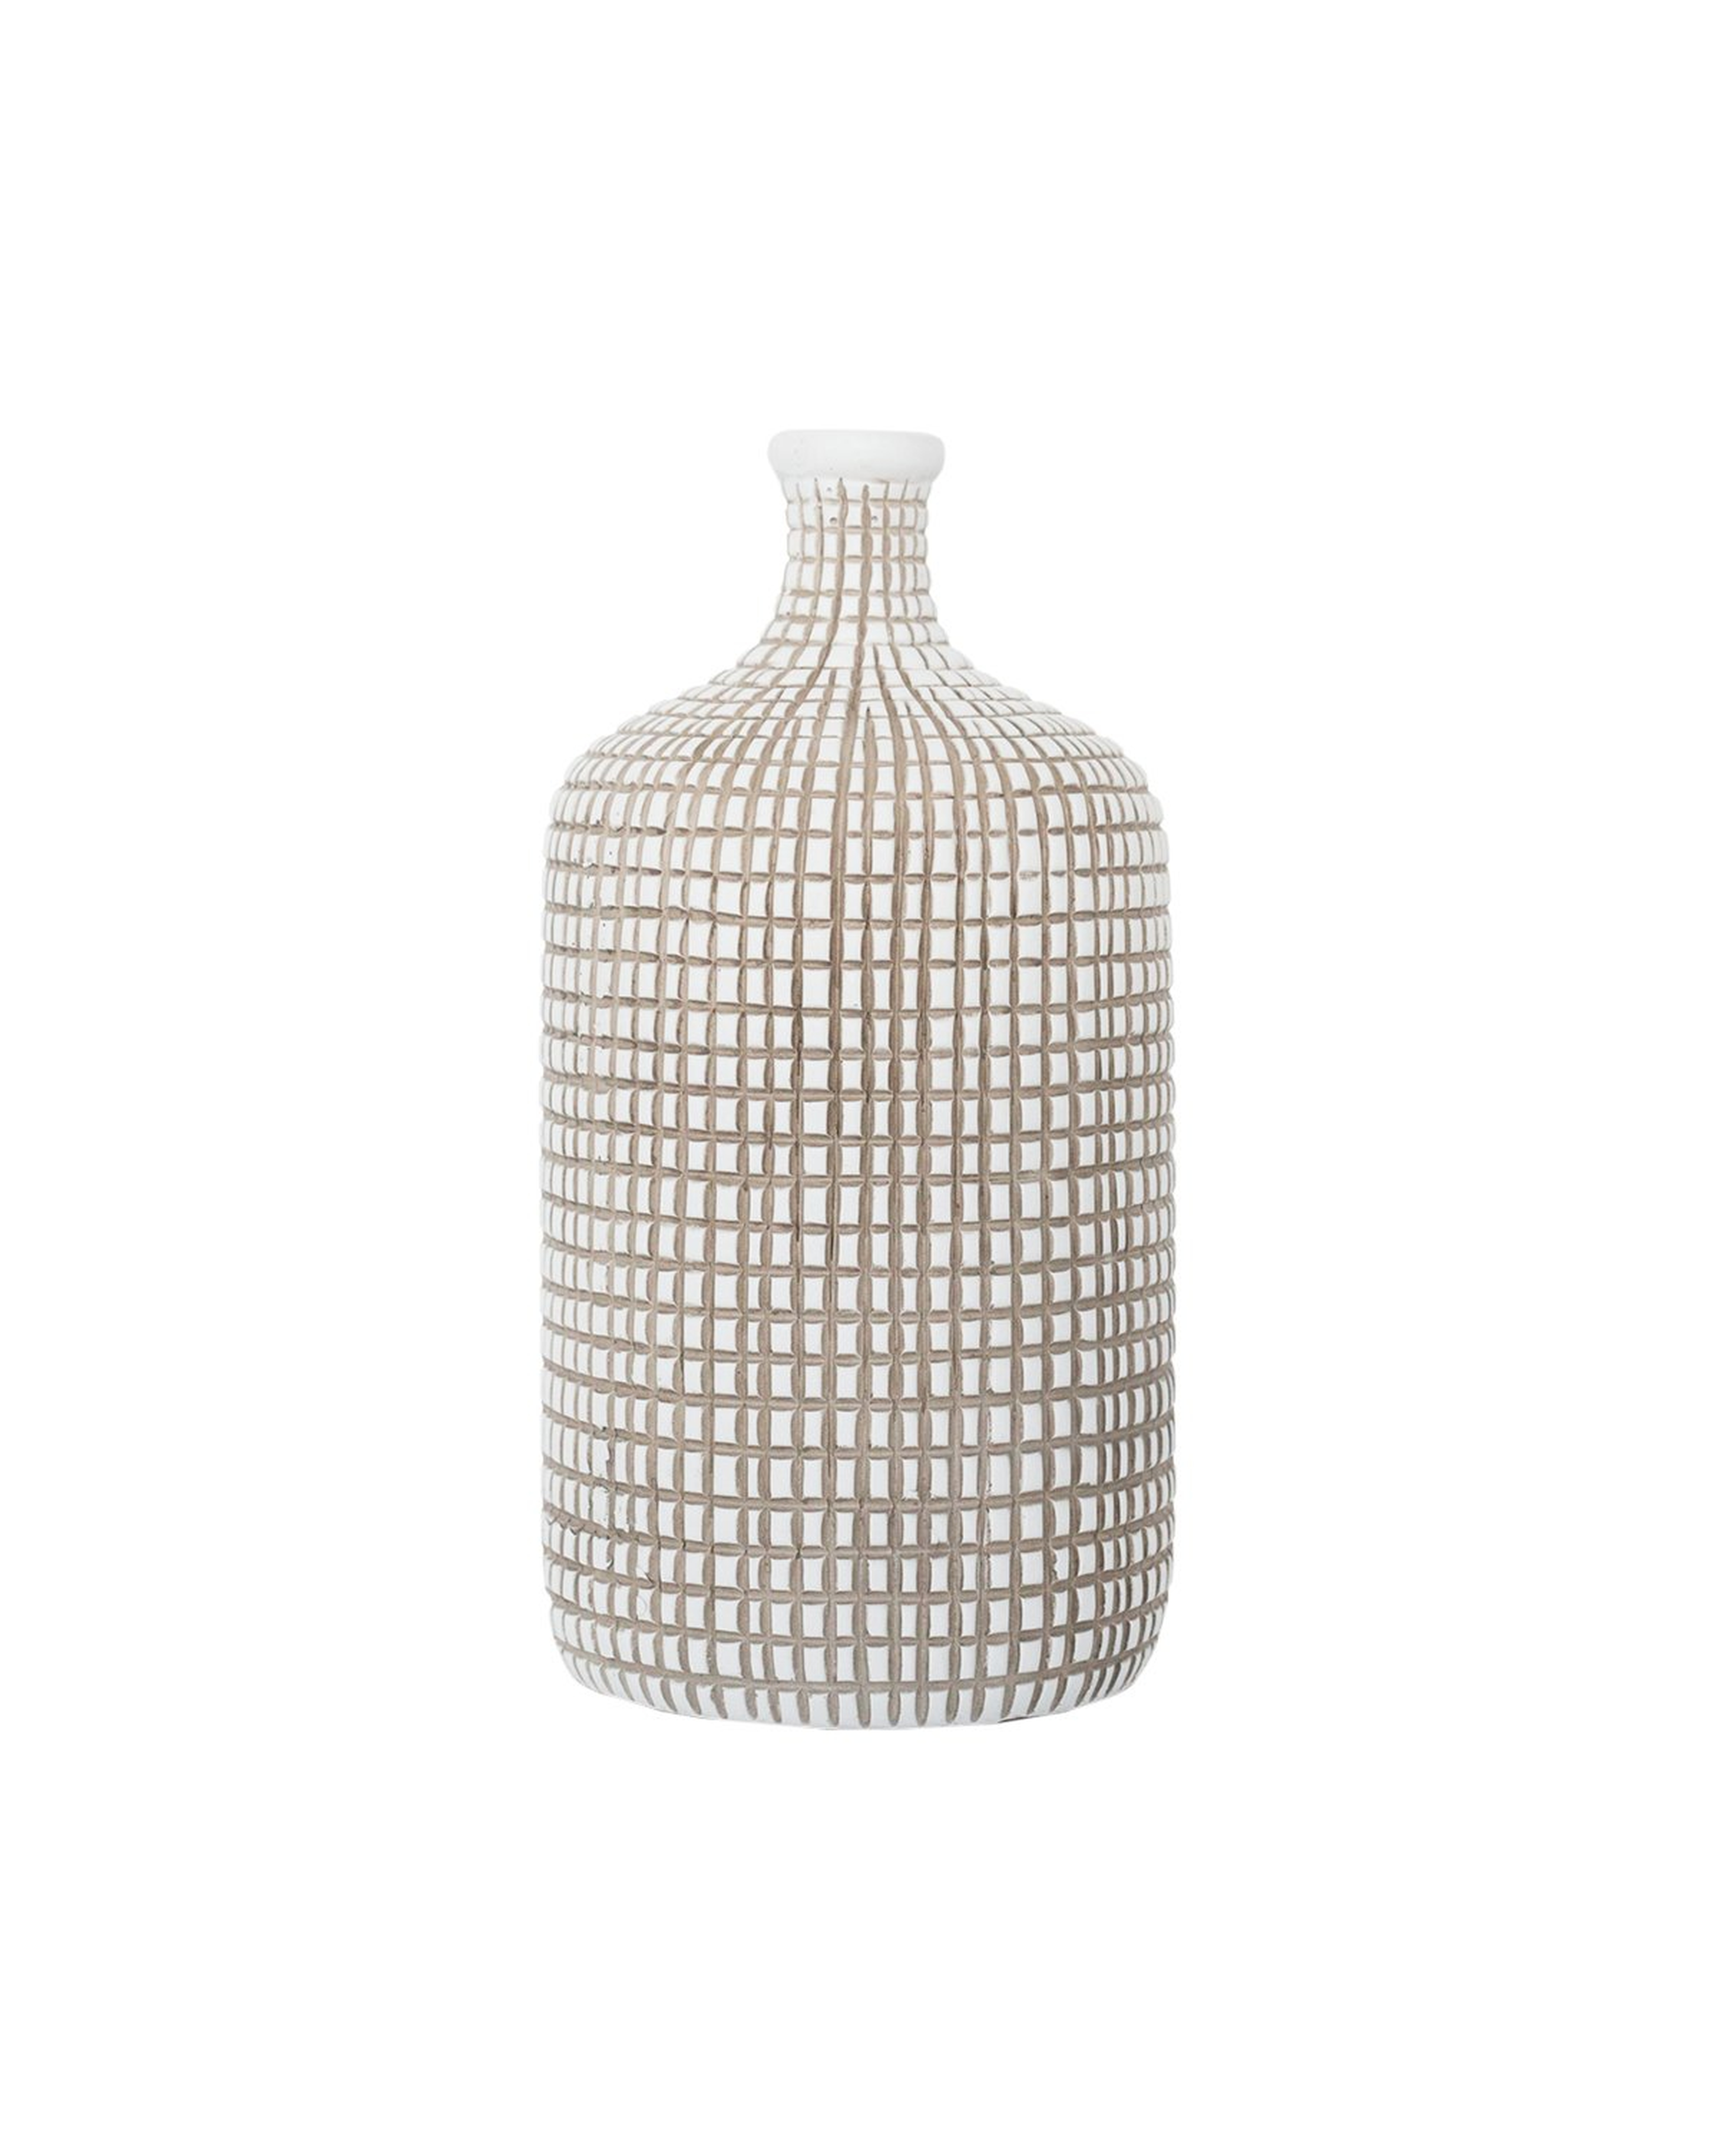 GRID BOTTLE VASE, SMALL - McGee & Co.